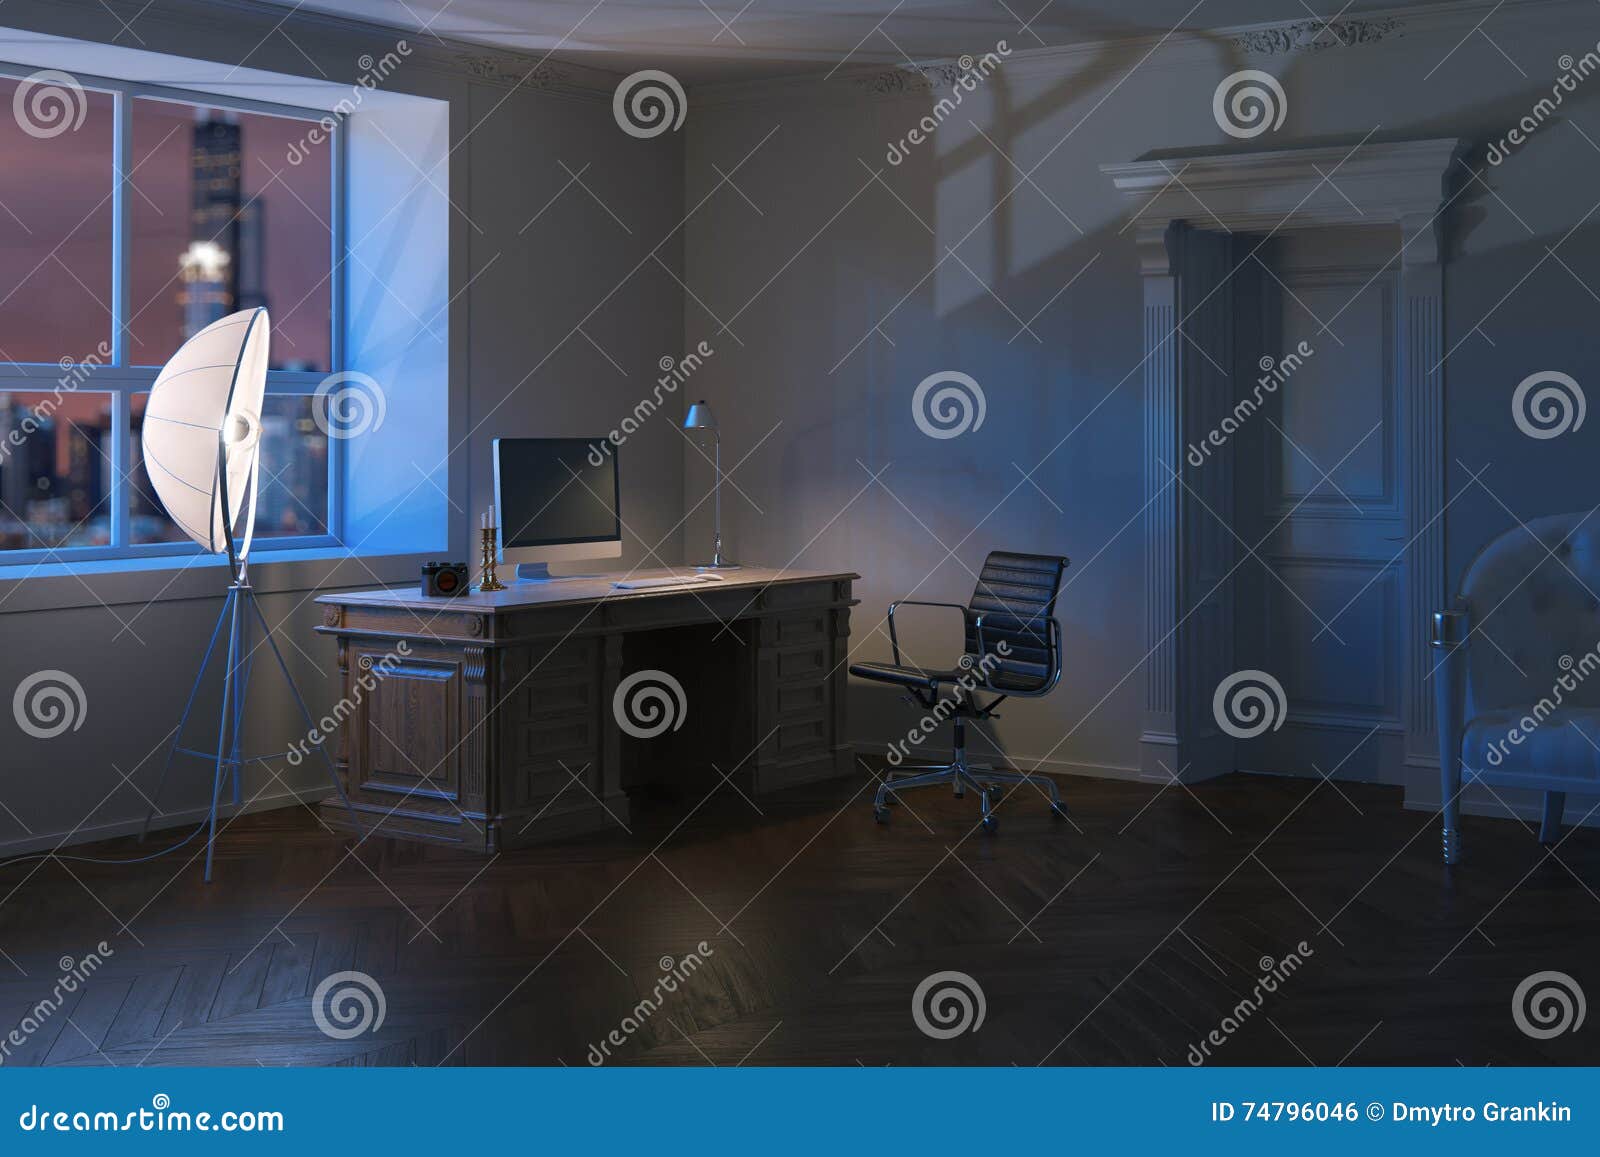 Luxury Modern Office Cabinet in Night Time. 3d Render. Stock Photo ...